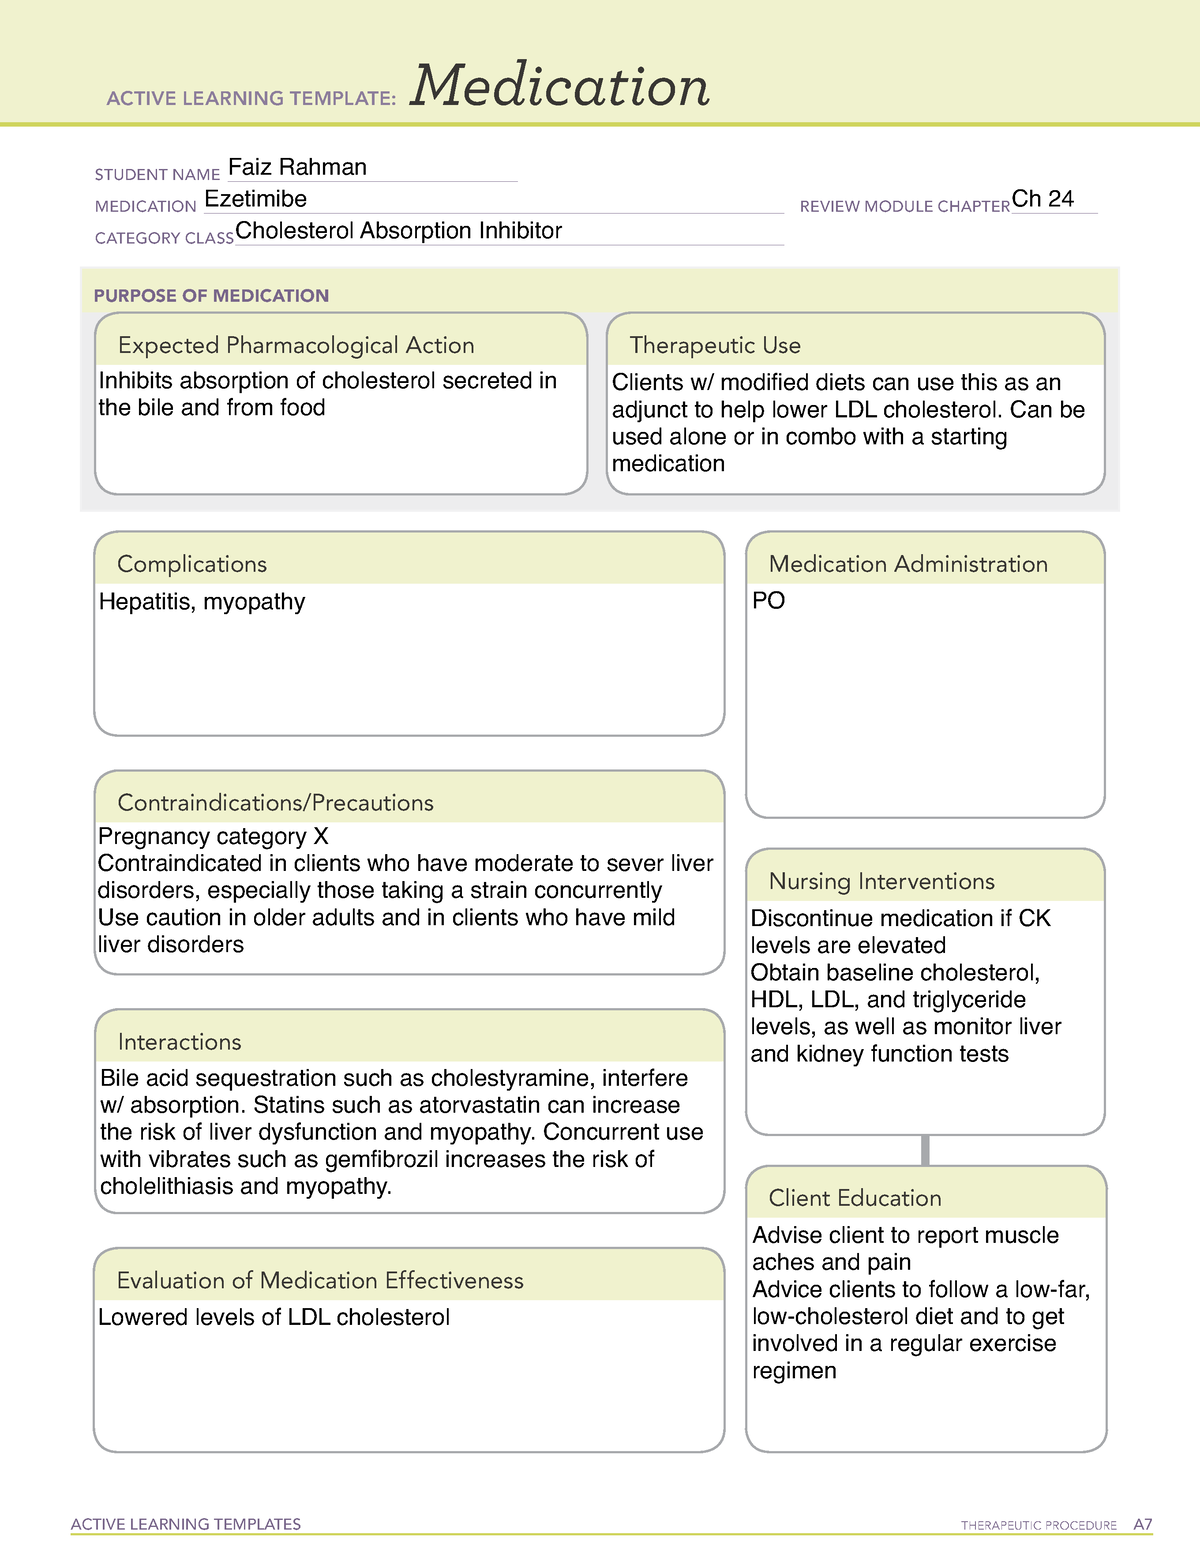 Ezetimibe Drug Template ACTIVE LEARNING TEMPLATES THERAPEUTIC